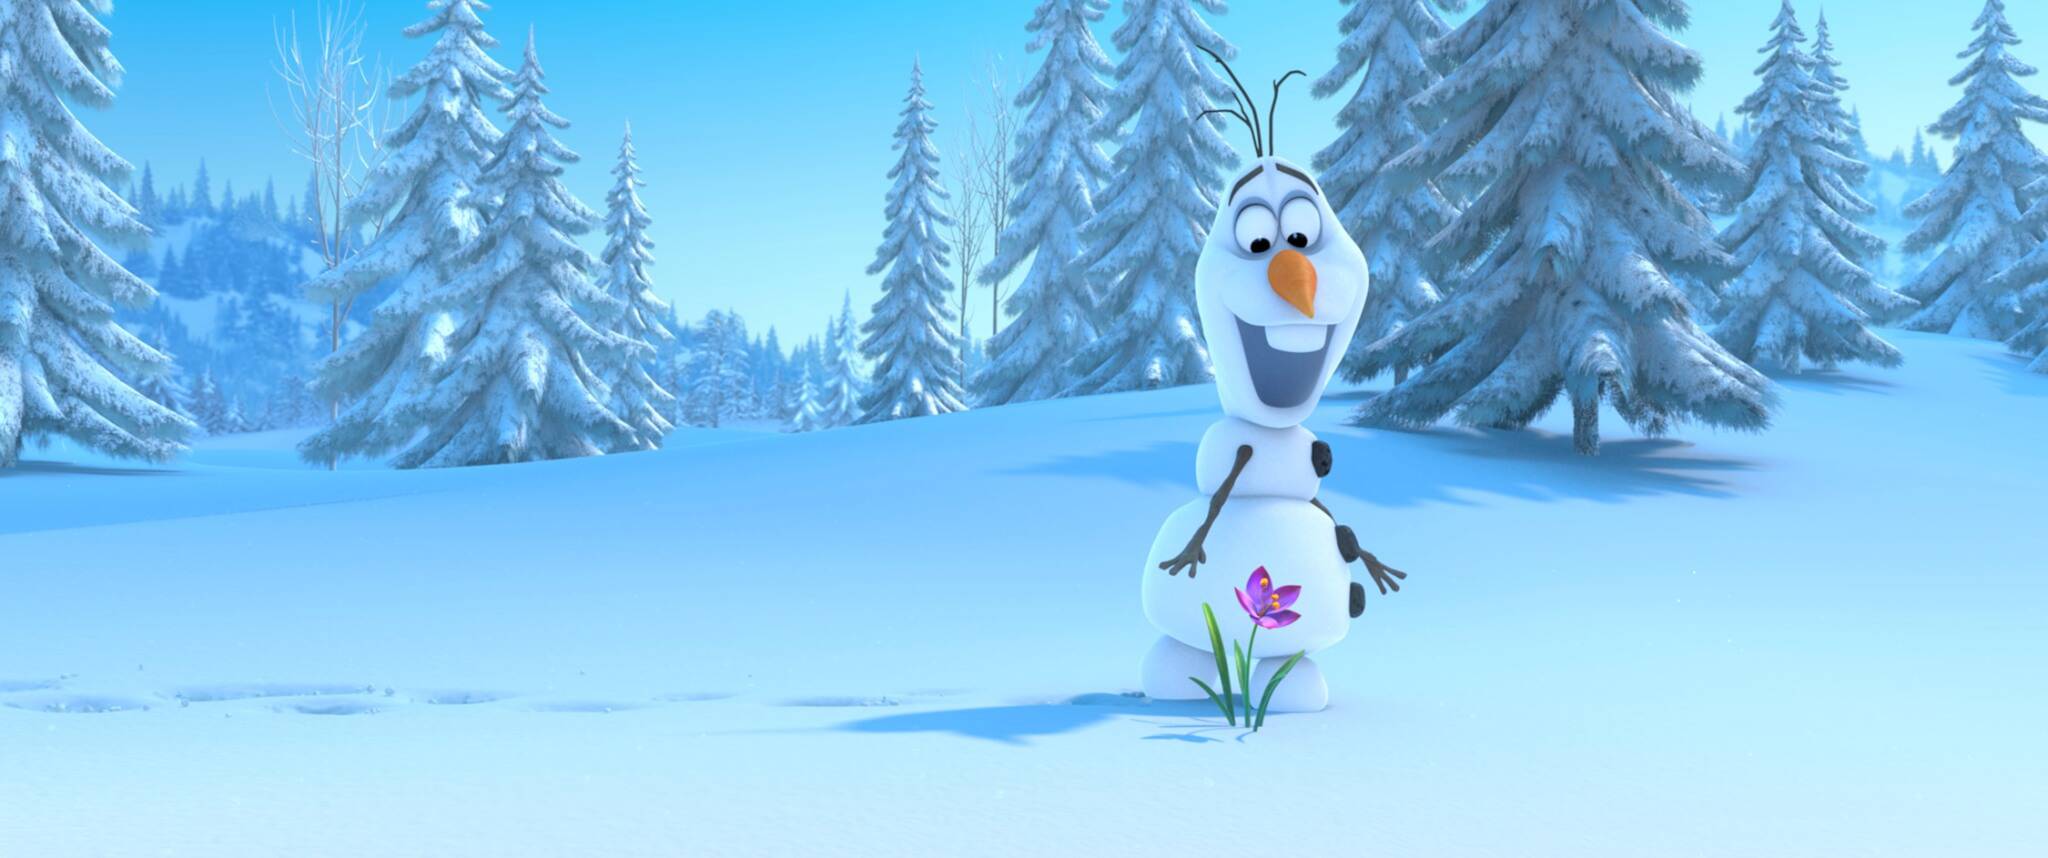 OLAF. ©2013 Disney. All Rights Reserved.